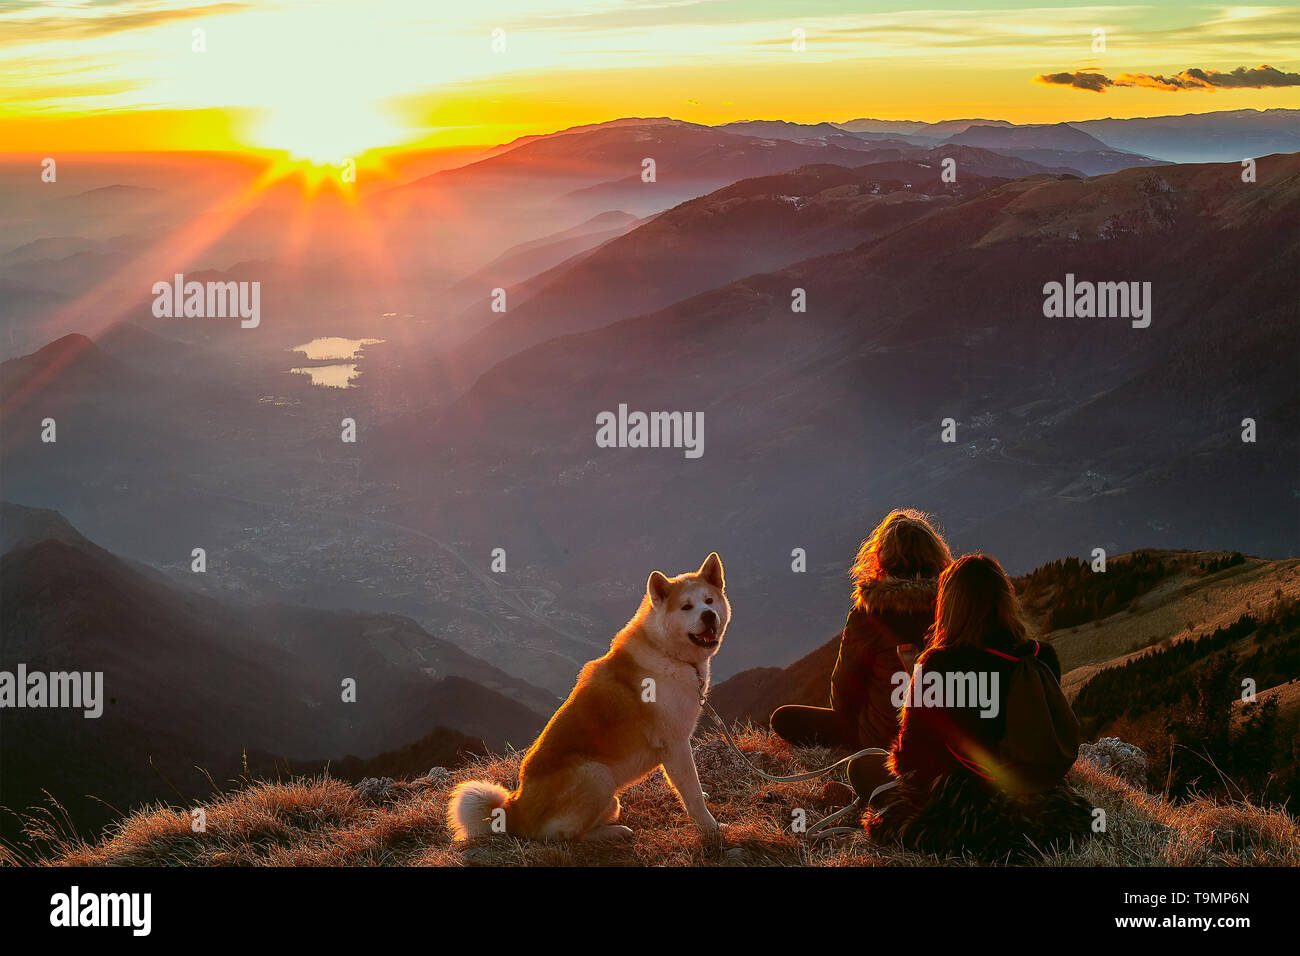 Youngs females sitting with siberian husky dog in mountains Stock Photo